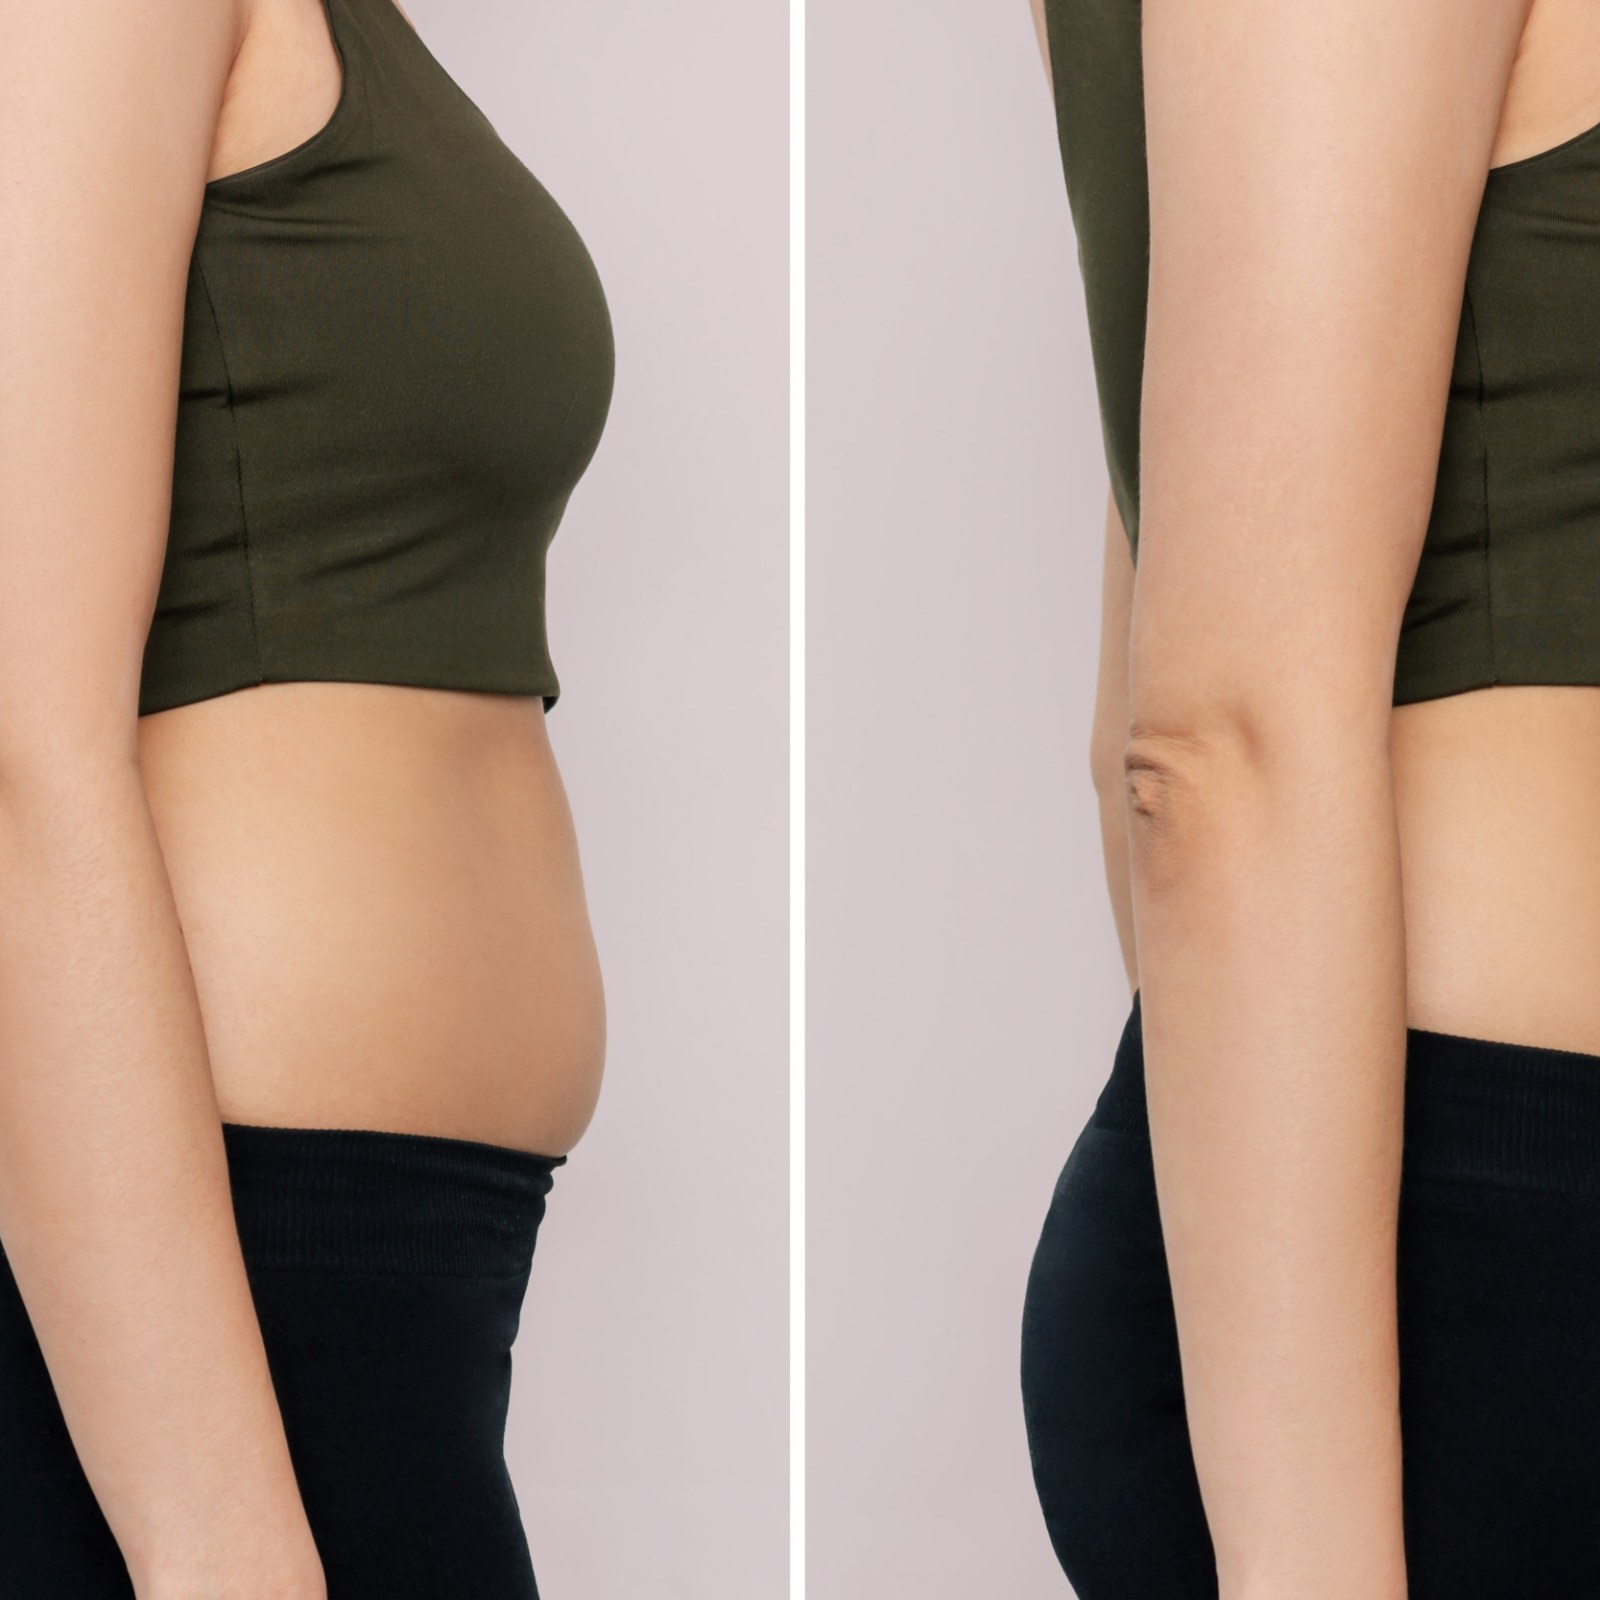 Stomach bloating: What are five ways a person can help stop bloating